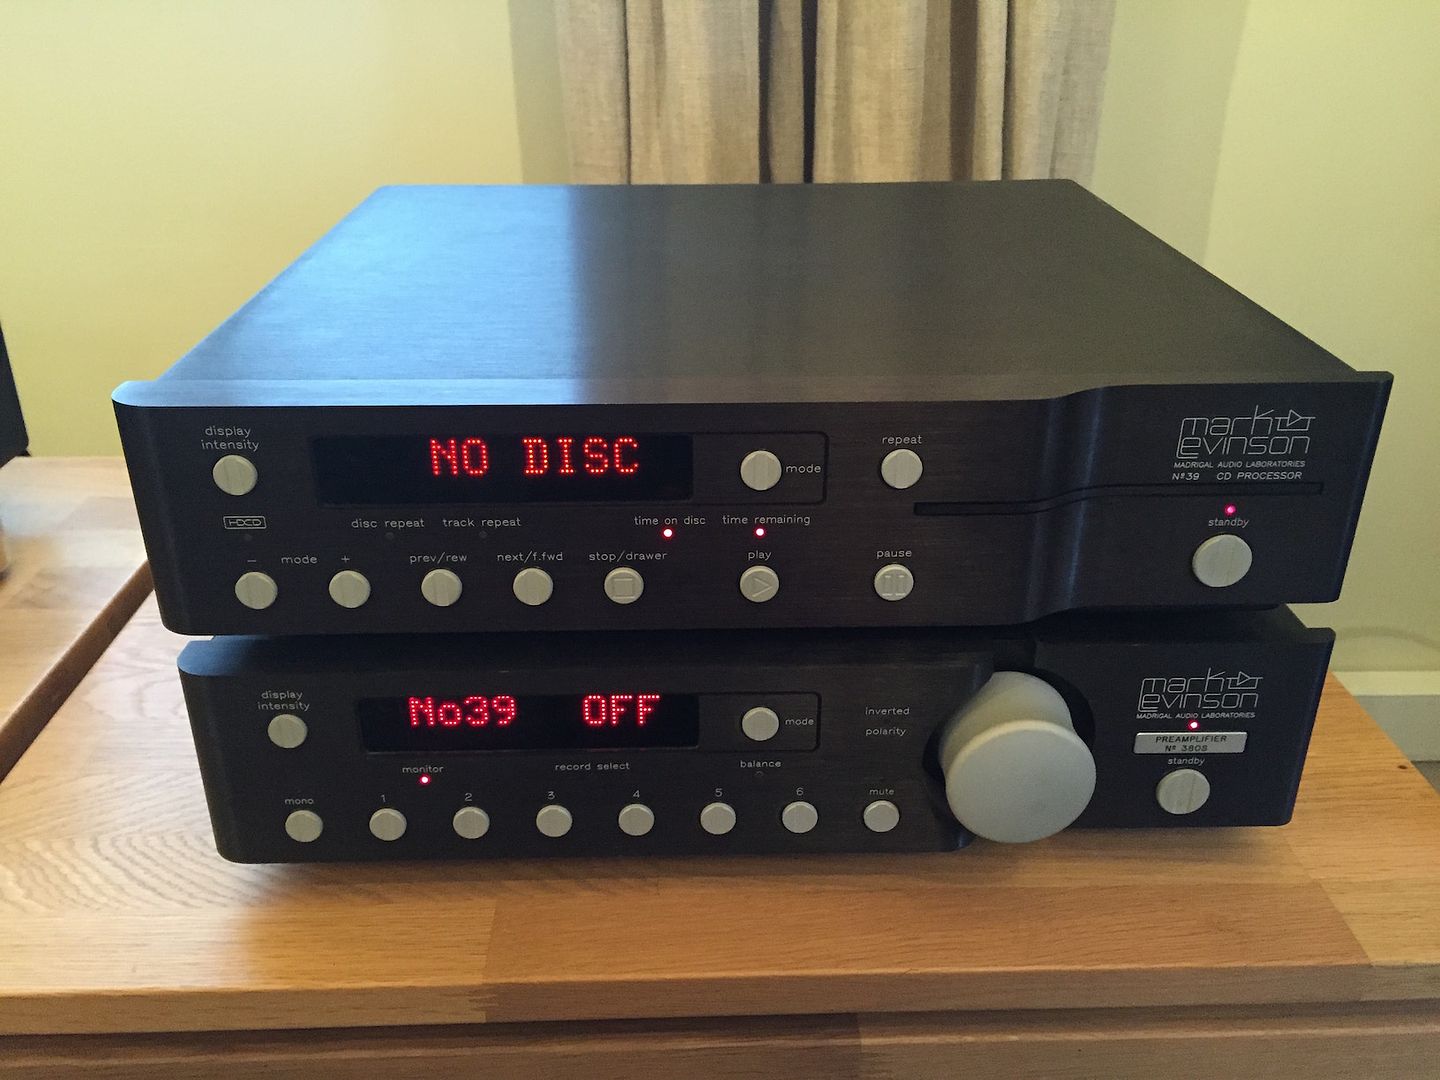 Mark Levinson No. 39 – High End Stereo Equipment We Buy